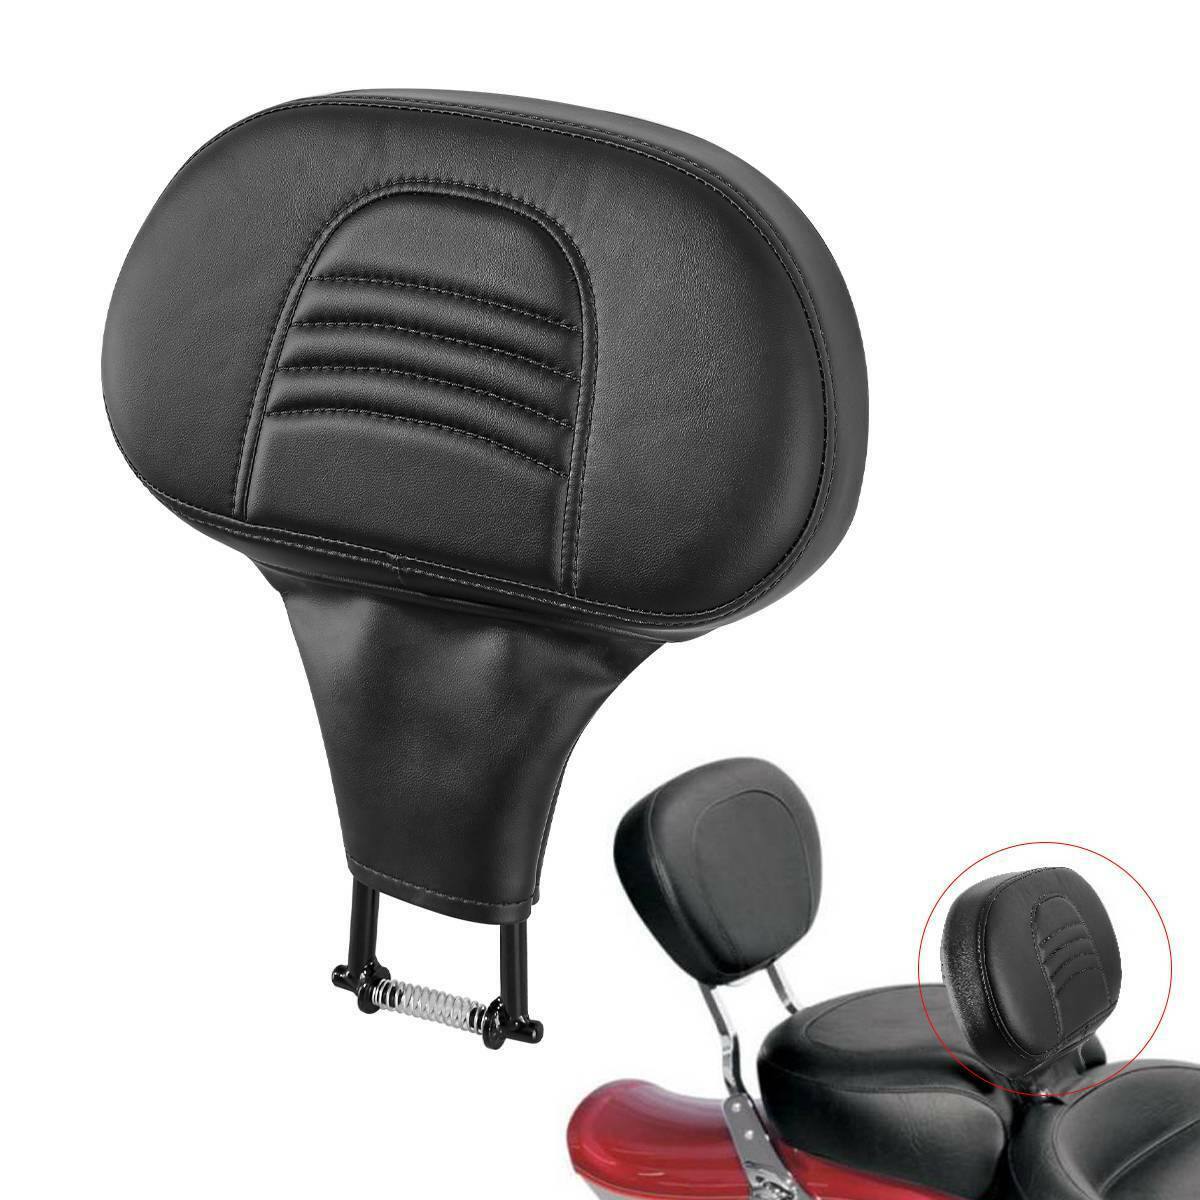 🔥 Synthetic Leather Driver Rider Backrest Pad Fit For Harley Street Glide 09-21 - Moto Life Products